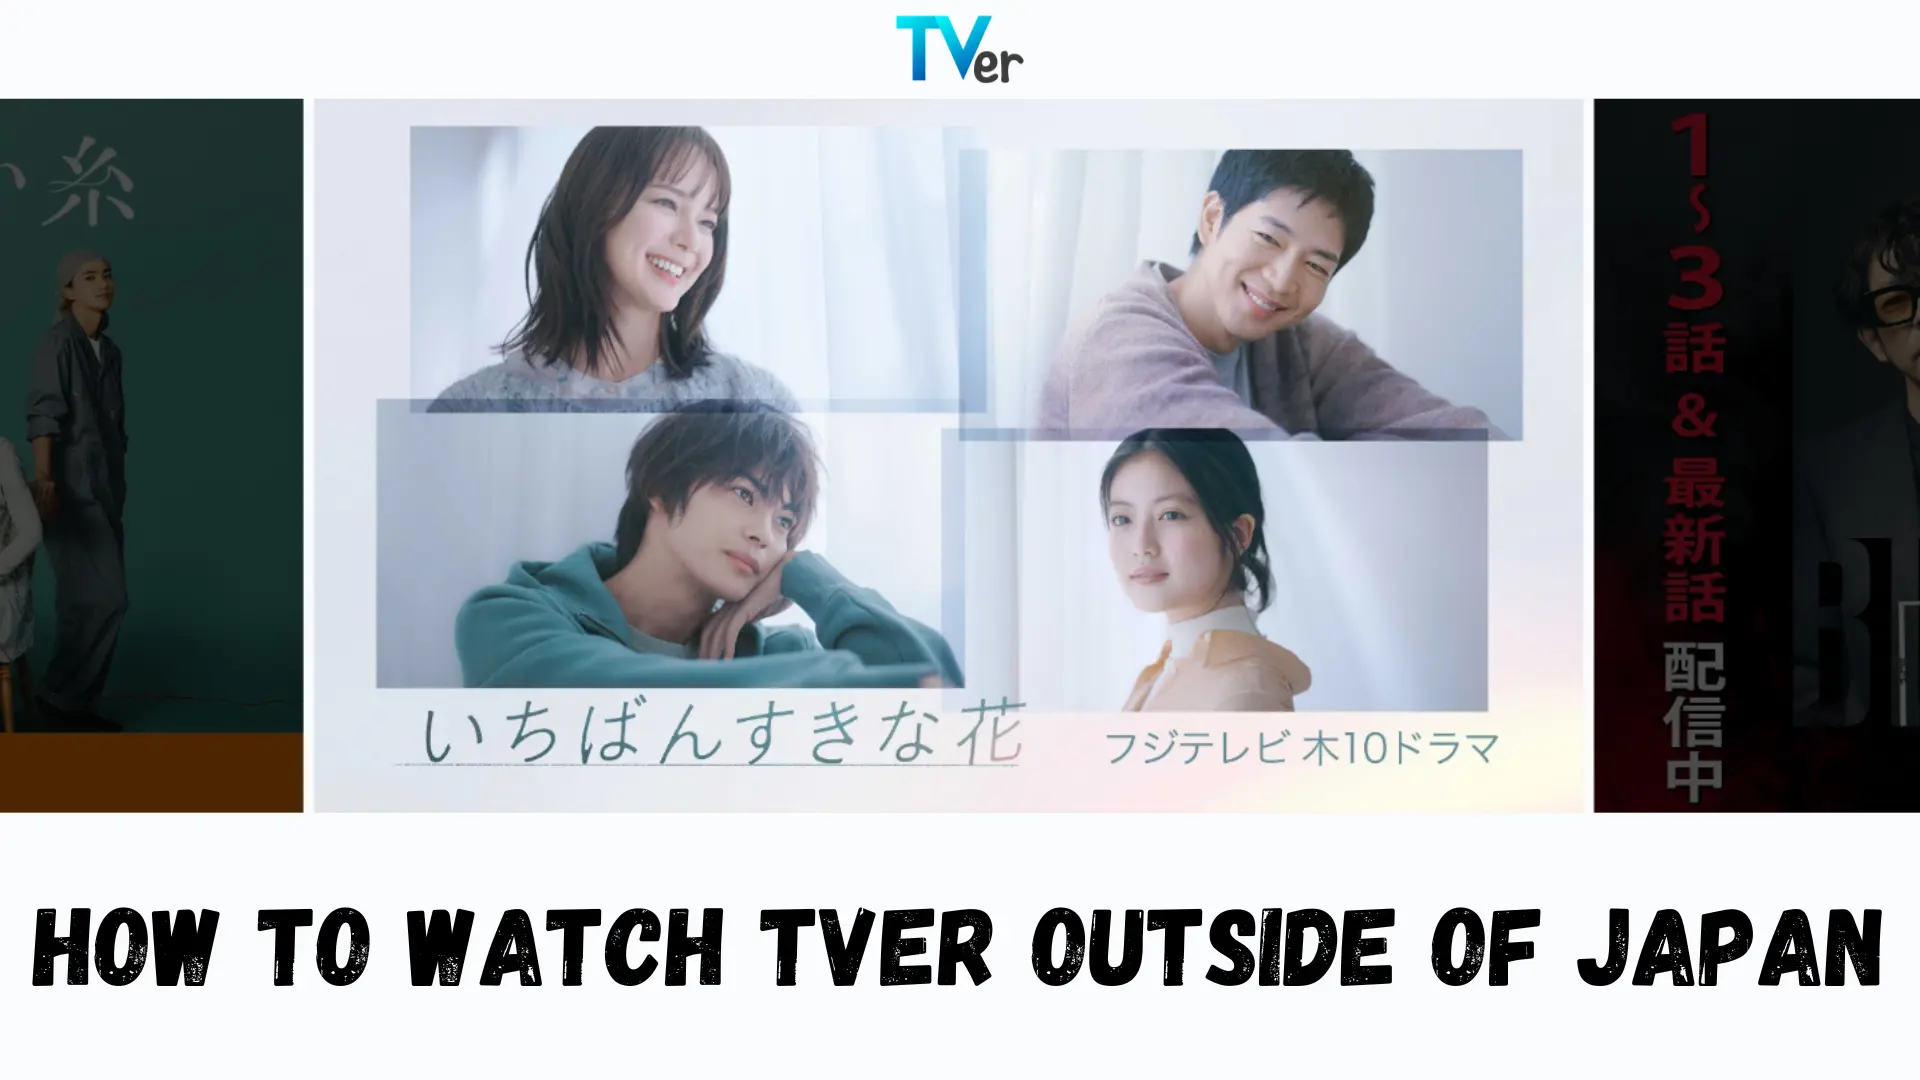 How to Watch TVer Outside of Japan